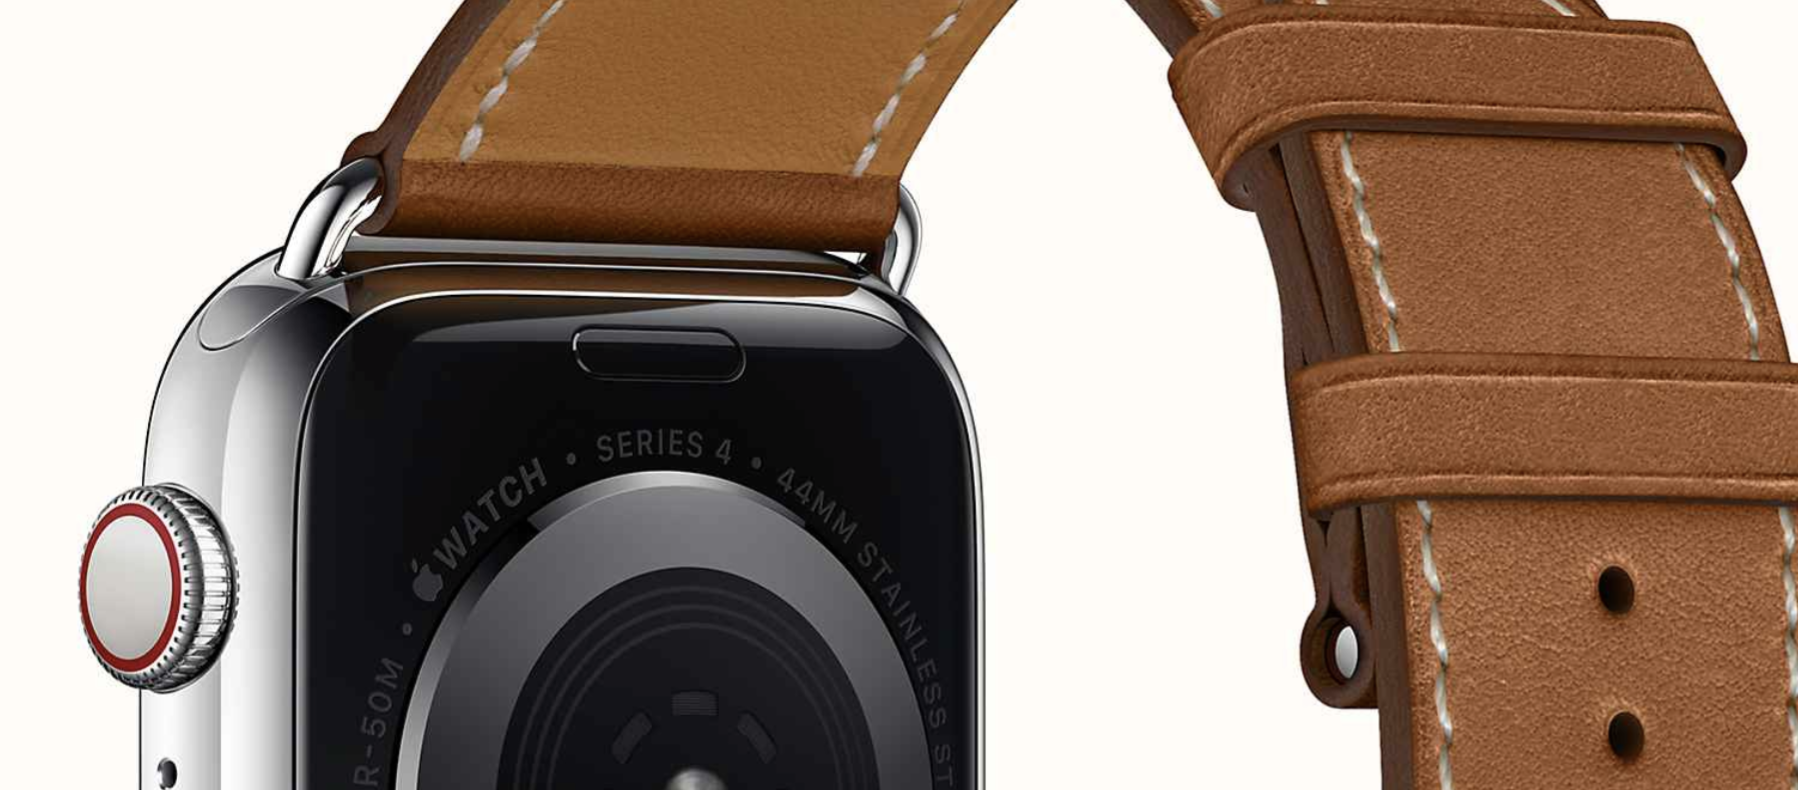 Apple Watch partner Hermès listing 'Series 5' bands, but may be